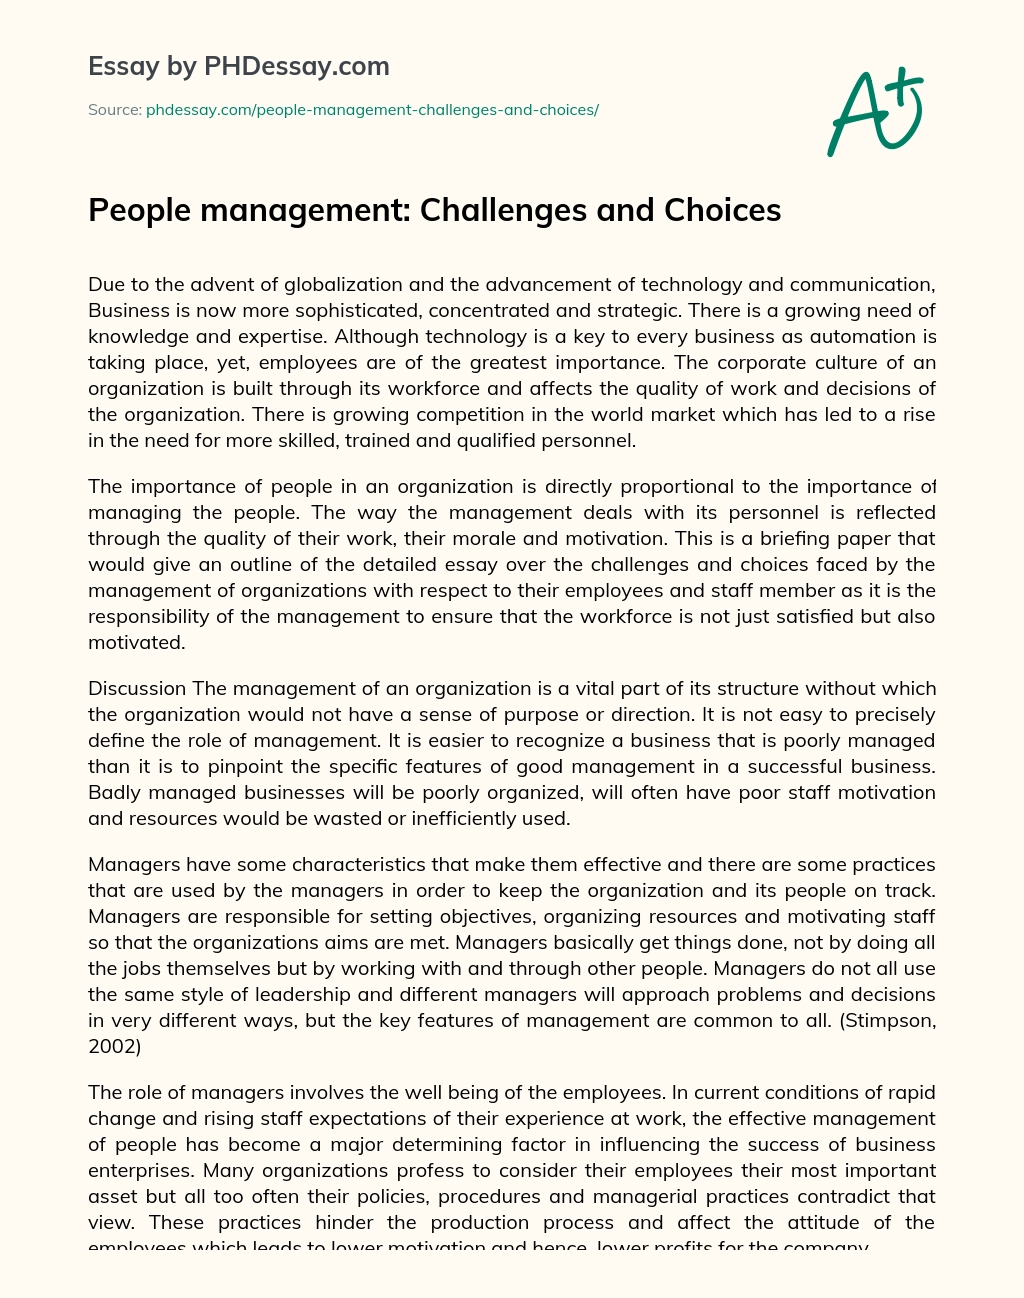 People management: Challenges and Choices essay